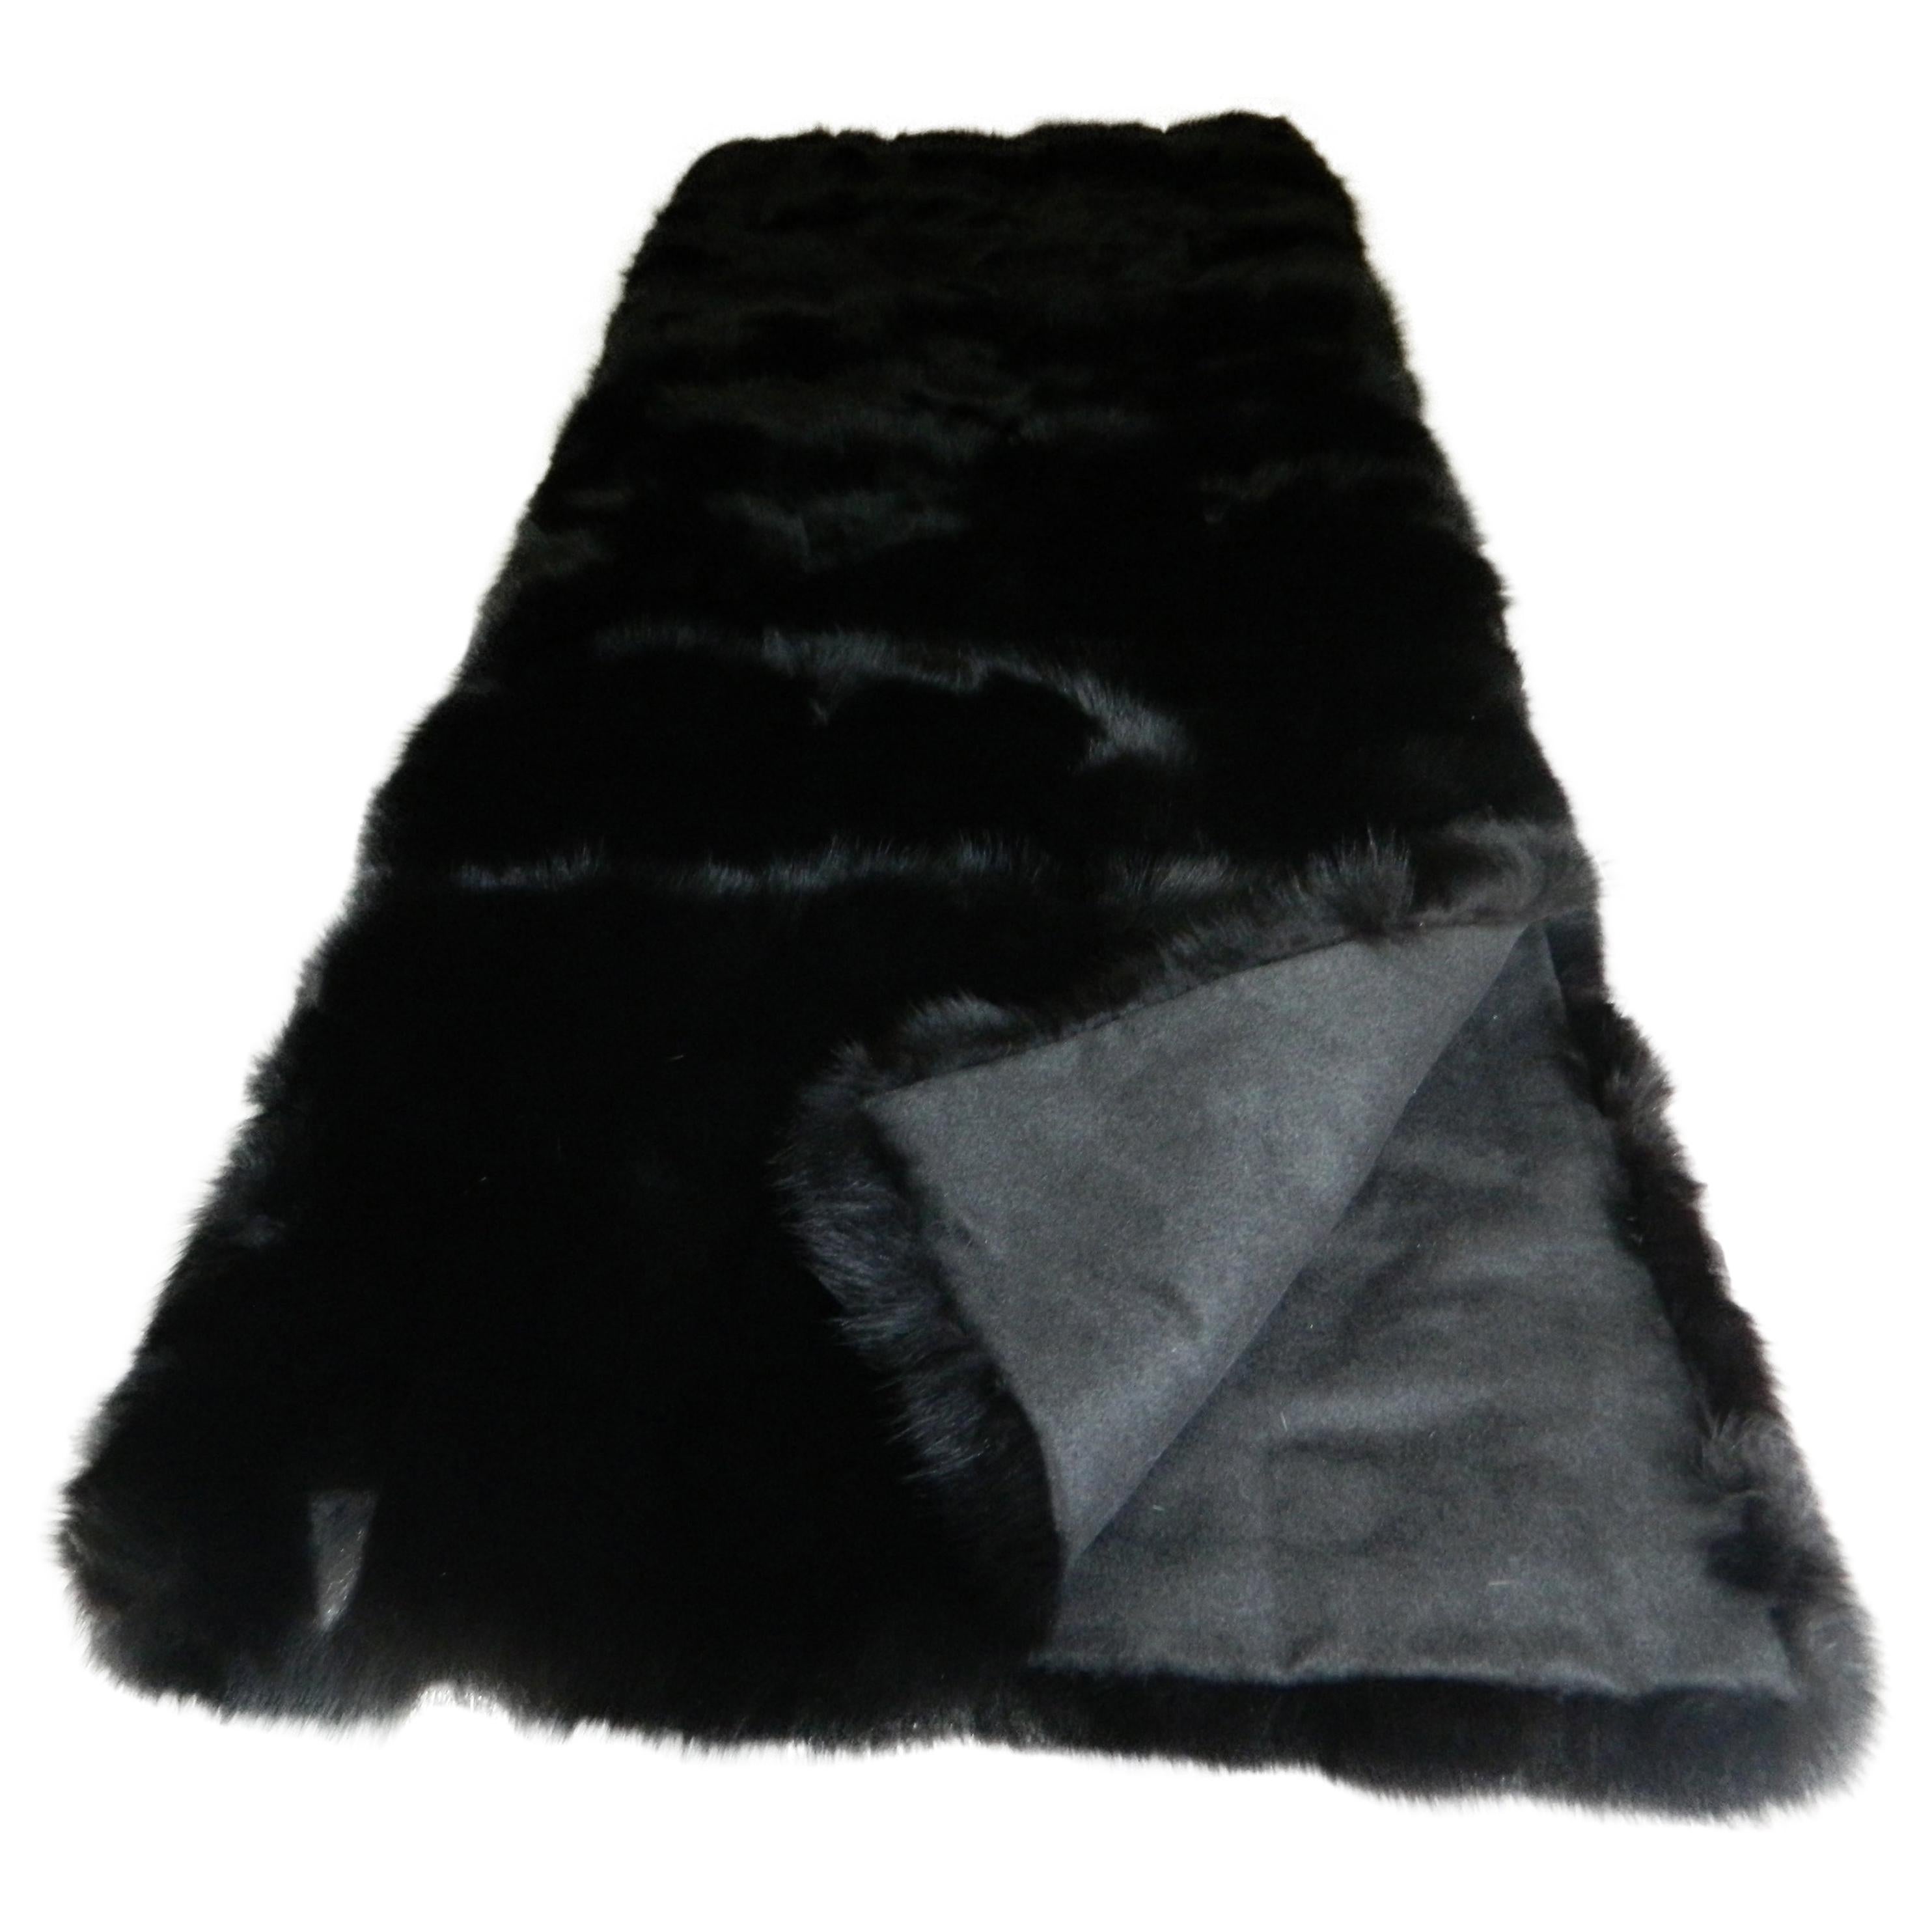 Luxurious Black Fox Fur Throw with Italian Cashmere Lining For Sale